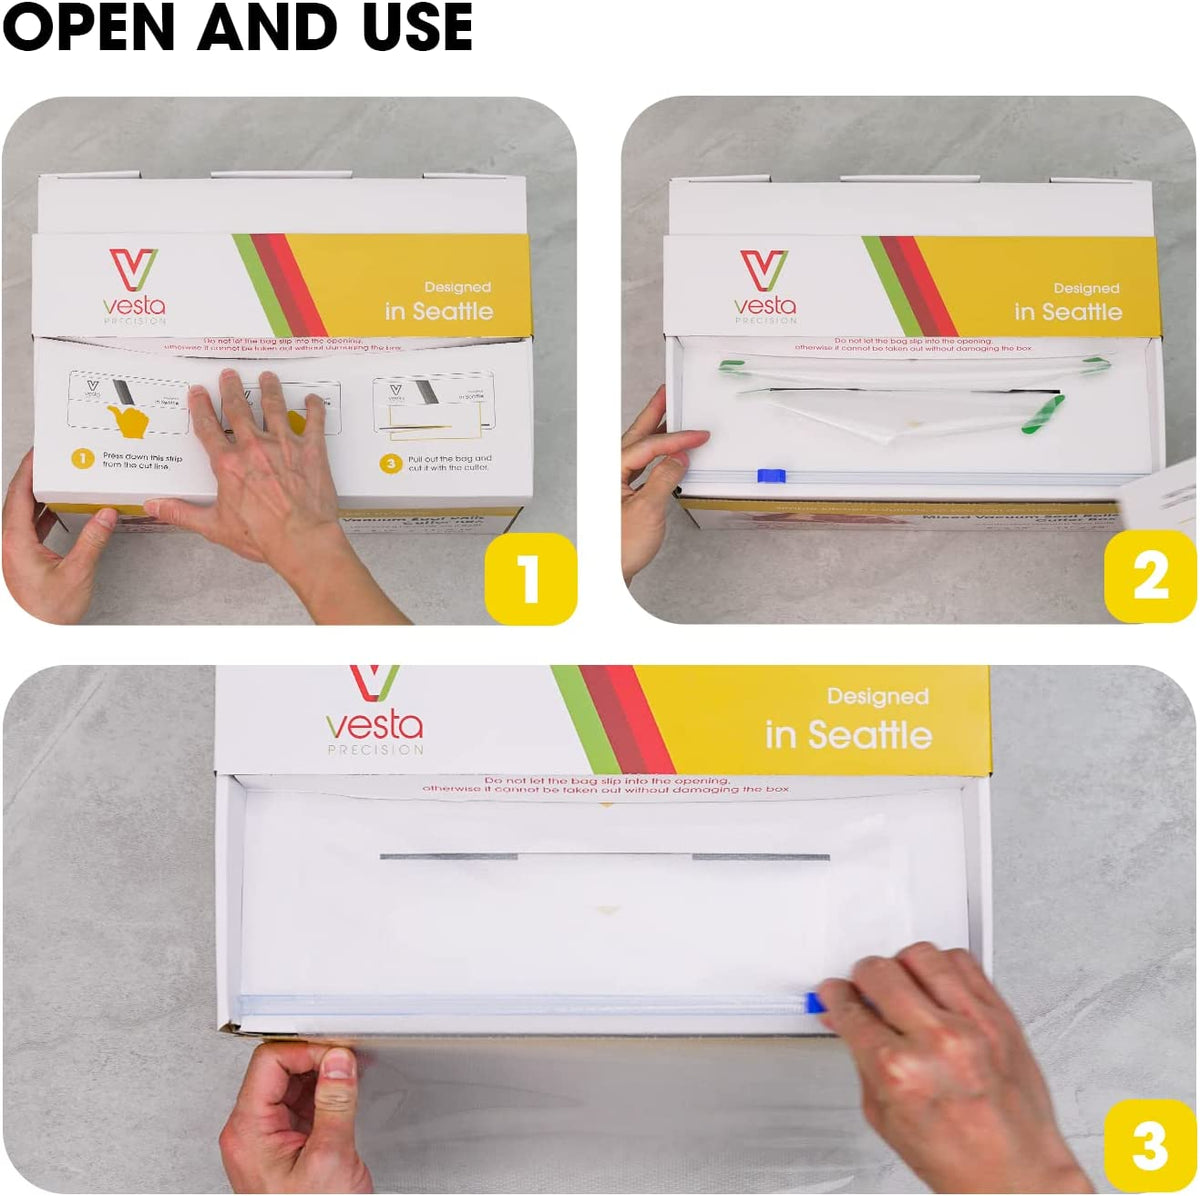 A picture showing how to open and use the cutter box.